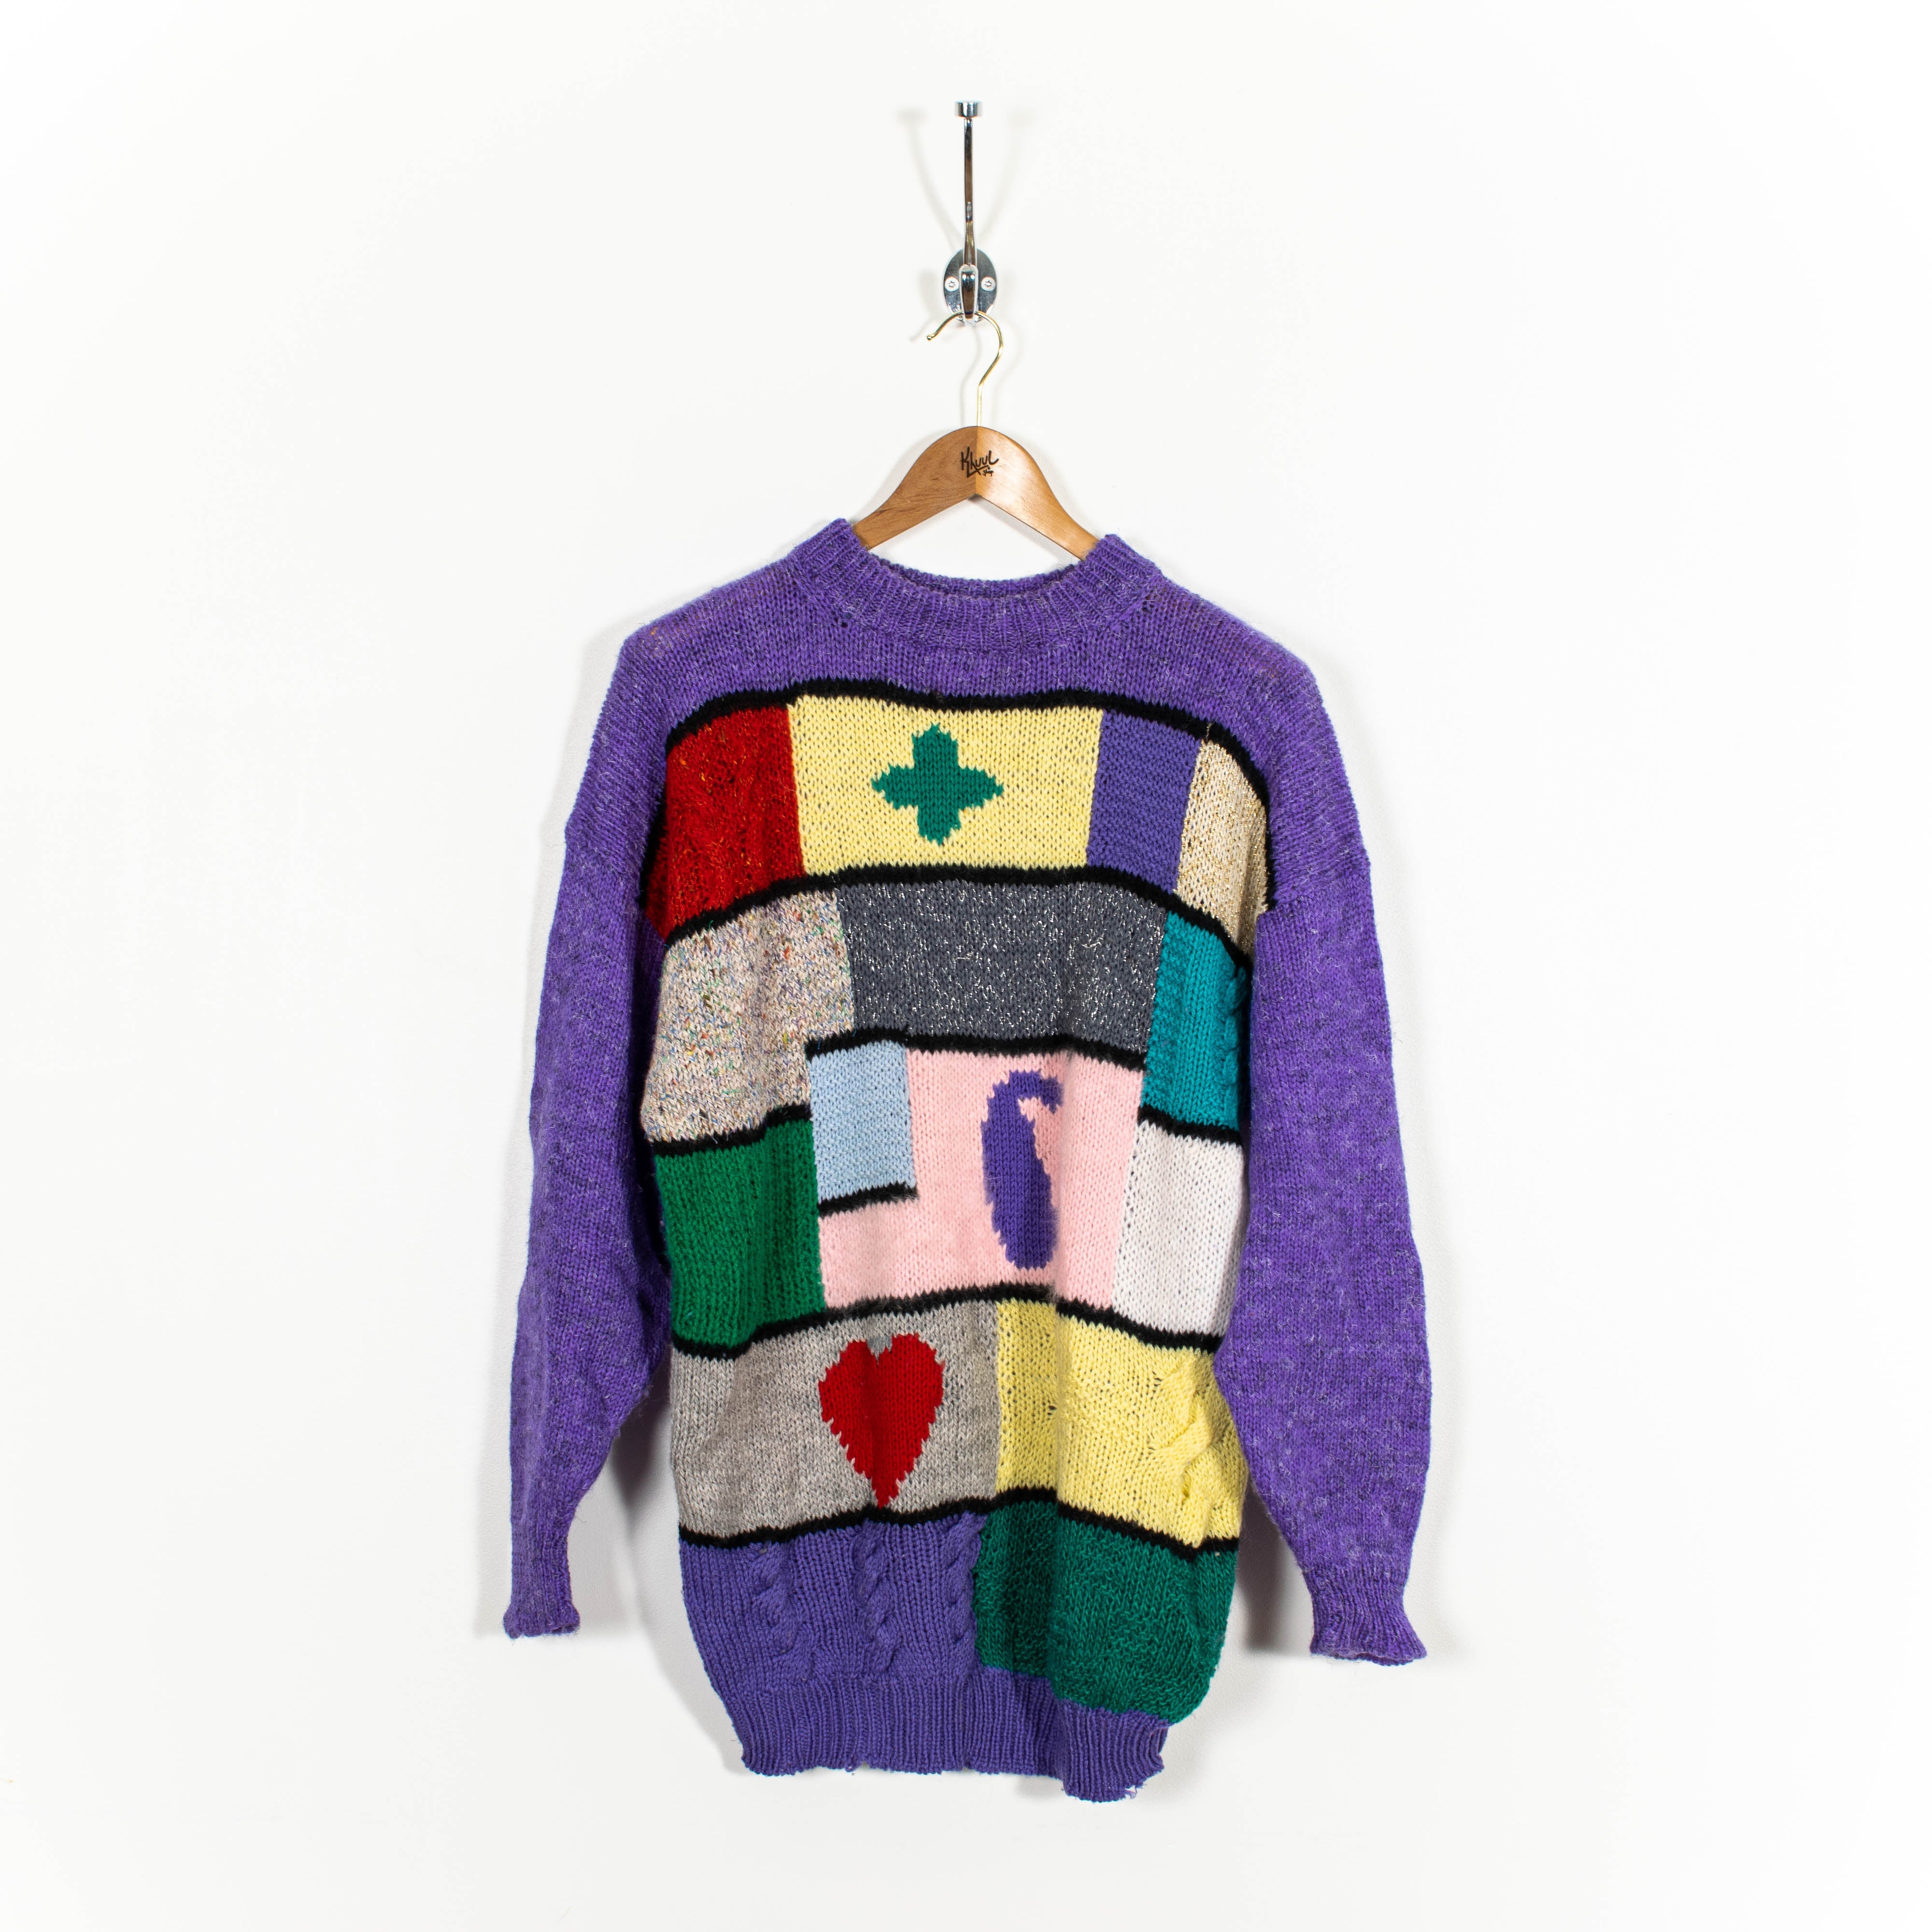 Vintage Multicolor Wool Blend Knit Pullover Sweater Abstract Pattern Mens M